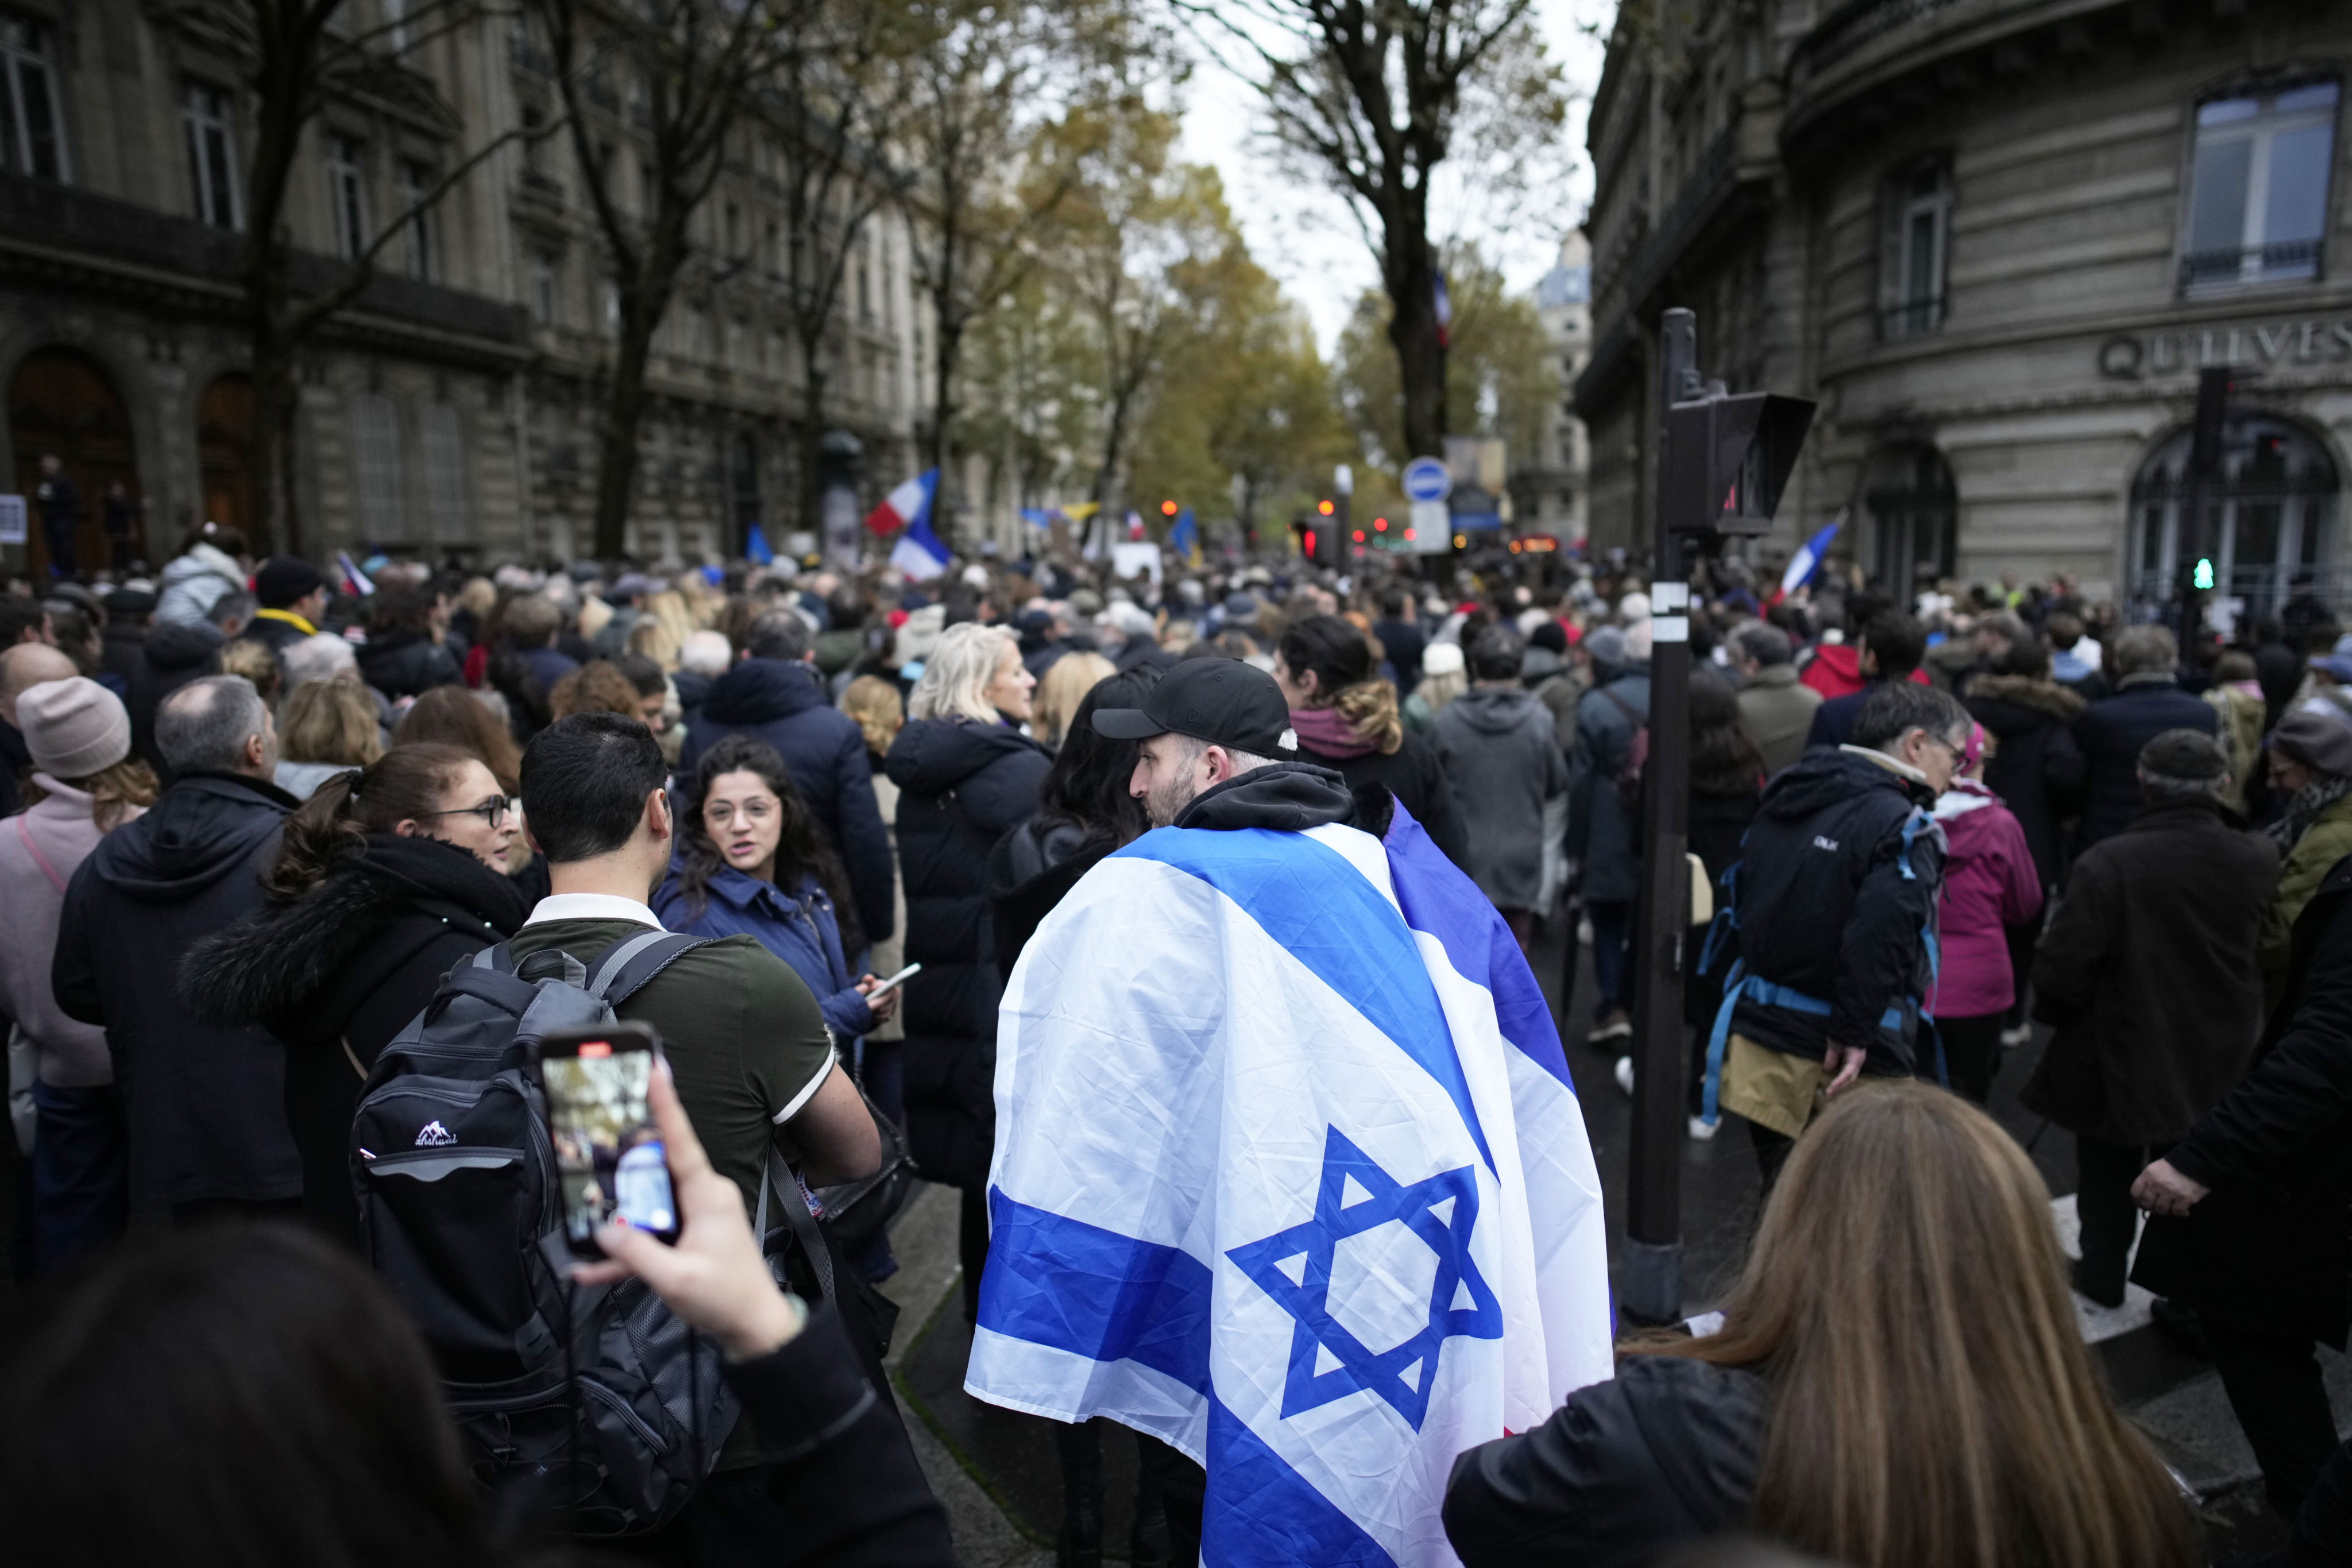 A demonstrator wearing an Israeli flag joins thousands of other people for a march against antisemitism in Paris, France, on Sunday. Photo: AP